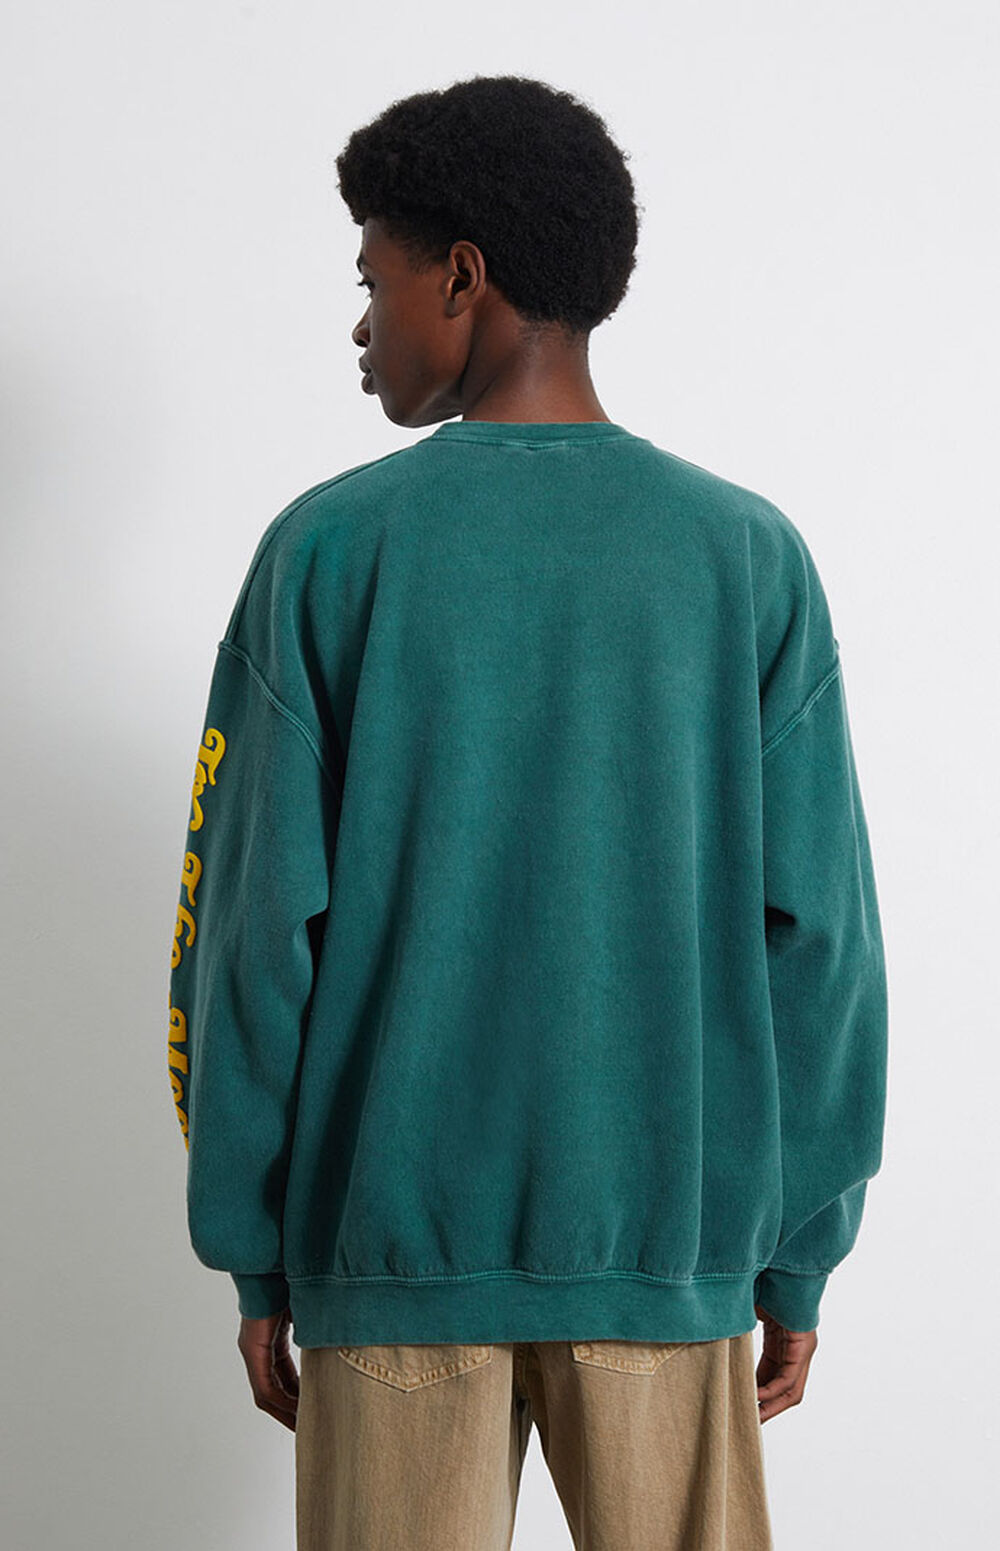 PacSun Hold On For Life Crew Neck Sweatshirt | PacSun